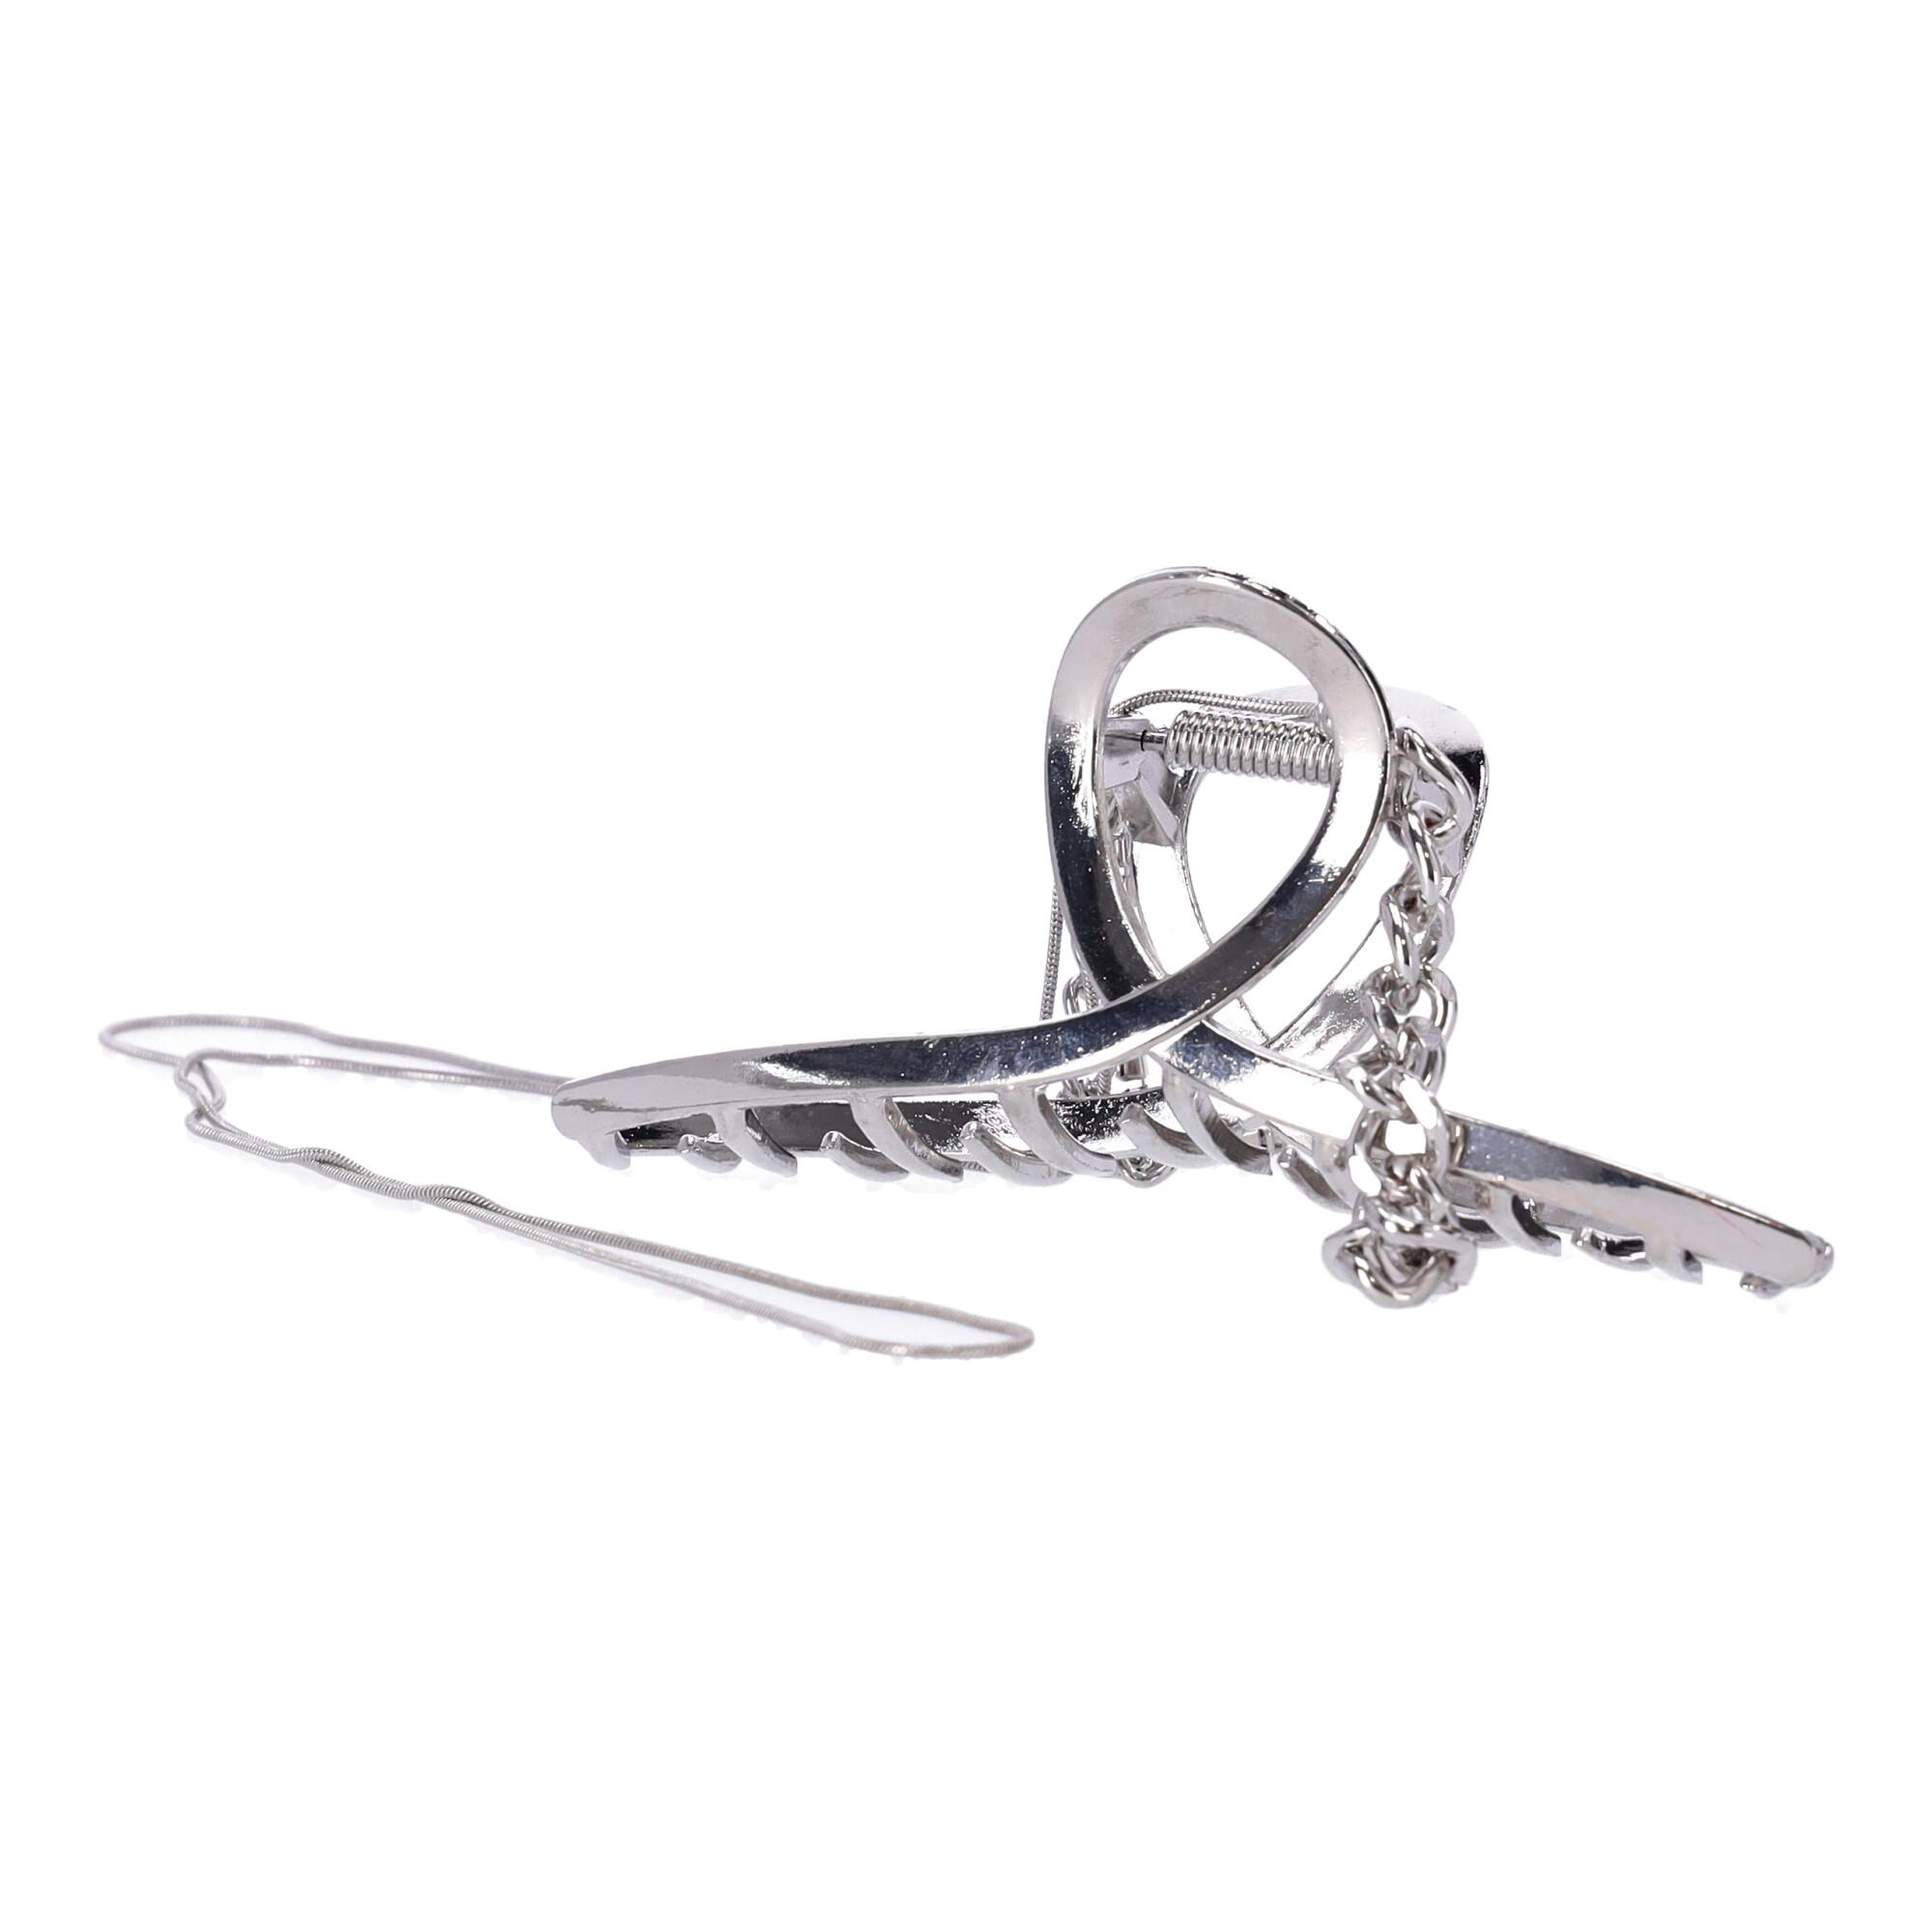 Decorative pin, hair buckle - silver, with chain